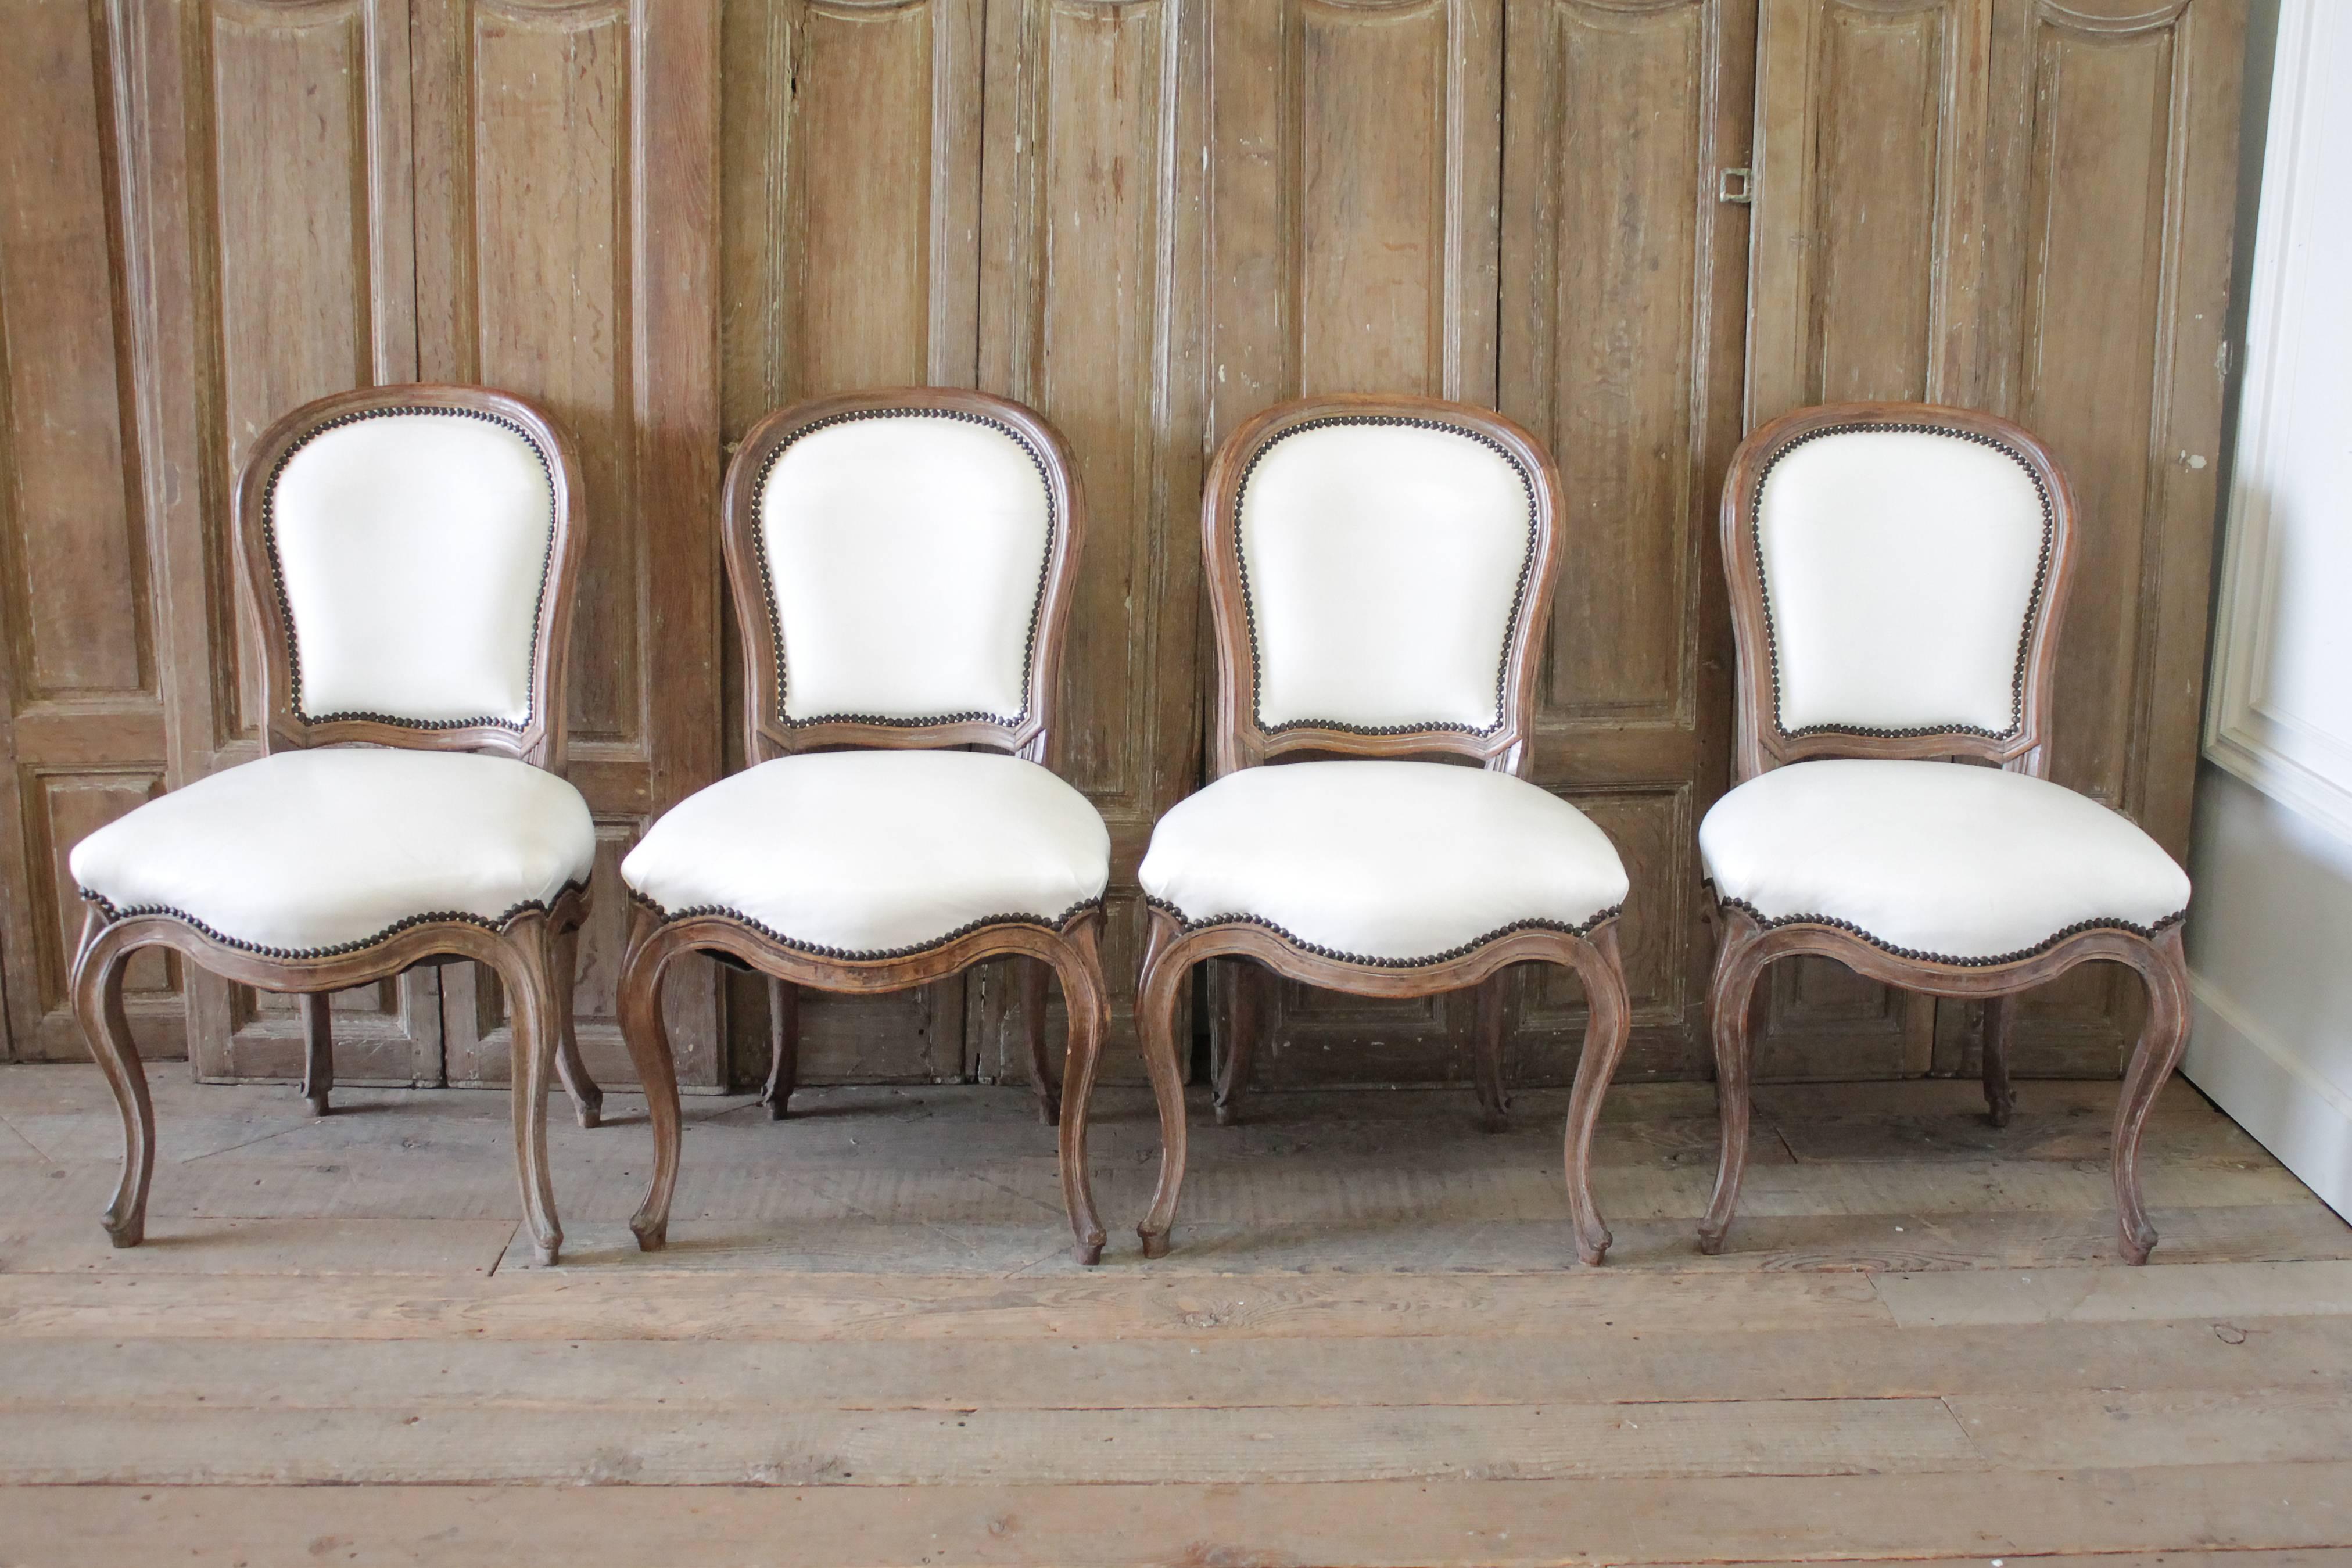 Set of ten early 20th century Louis XV style dining chairs in white leather.
Nine side chairs that measure 21